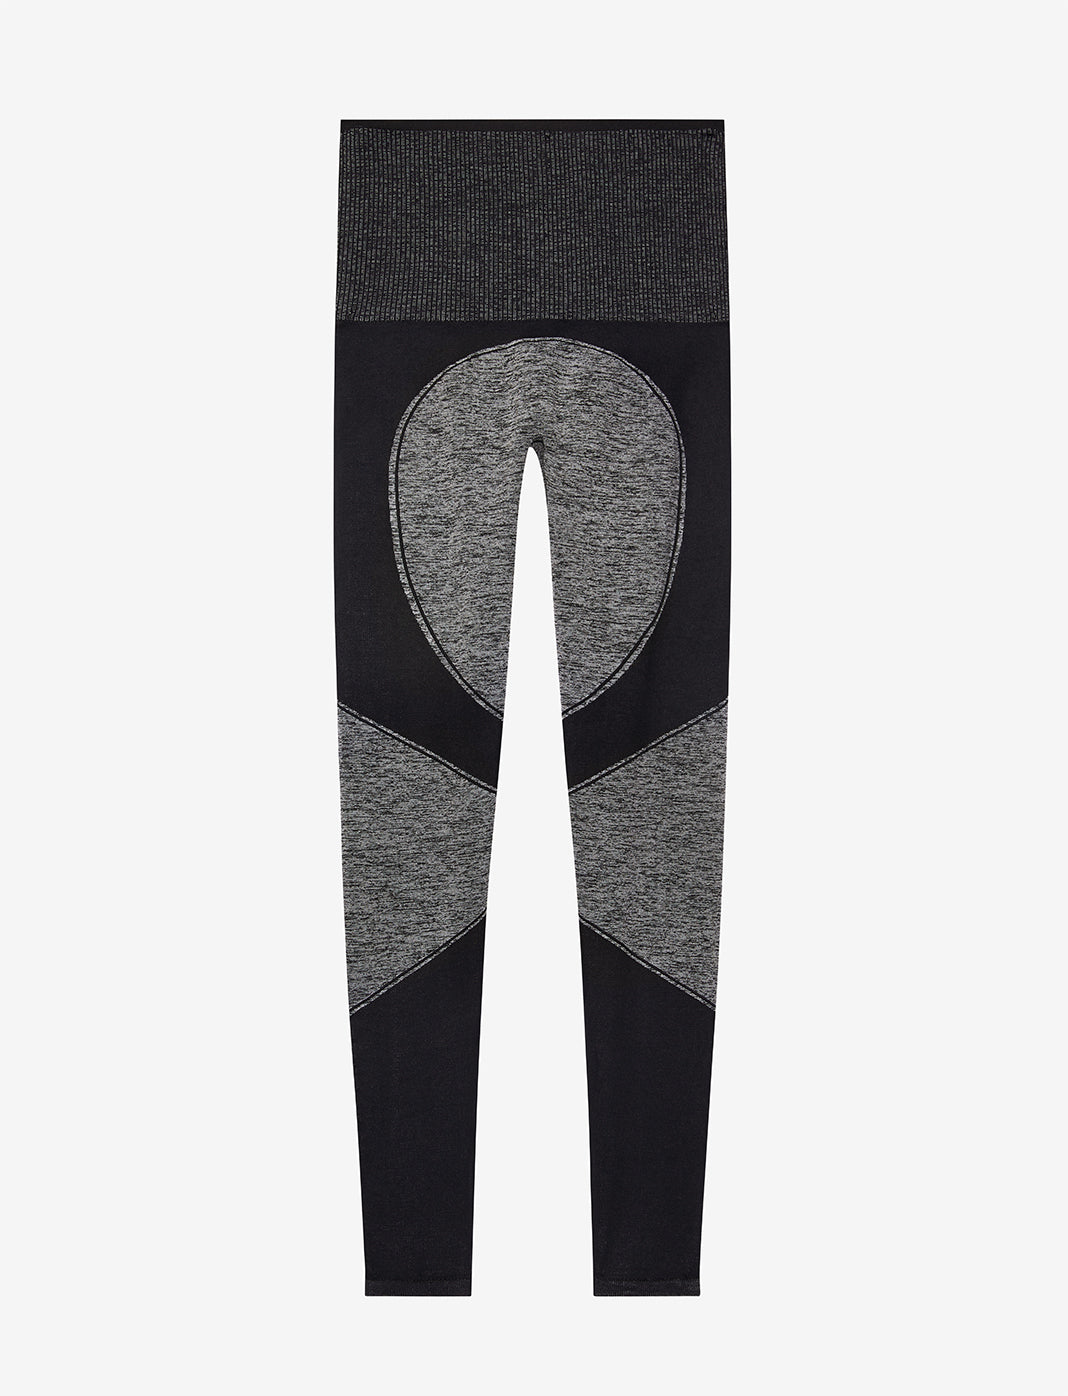 WOMAN WITHIN Stretch Cotton Leggings HEATHER GREY Size 5X 38/40 NEW